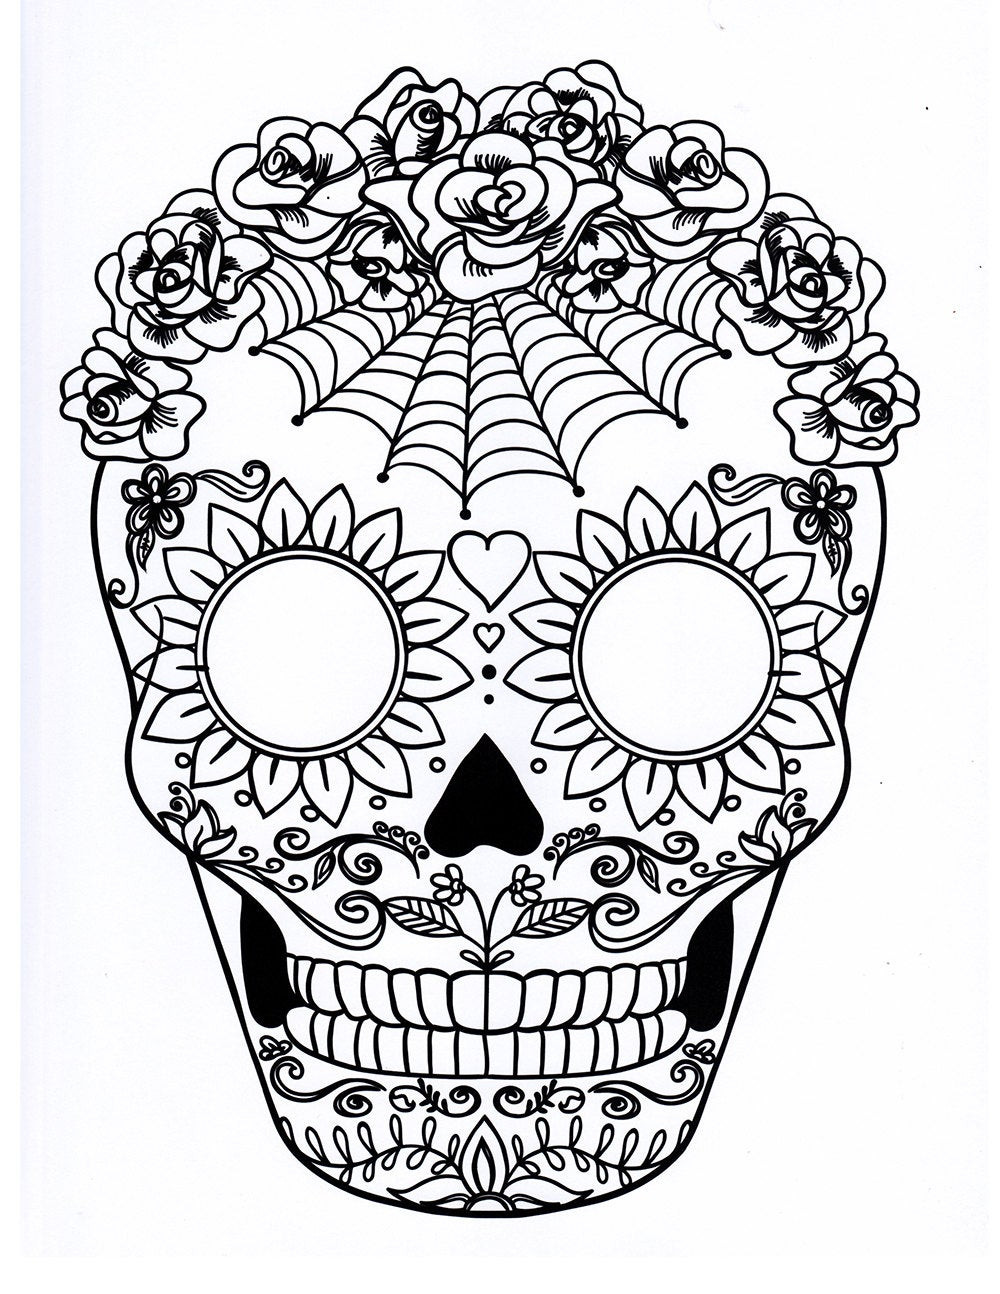 Sugar Skull Coloring Pages For Kids
 Five different sugar skull coloring pages printable